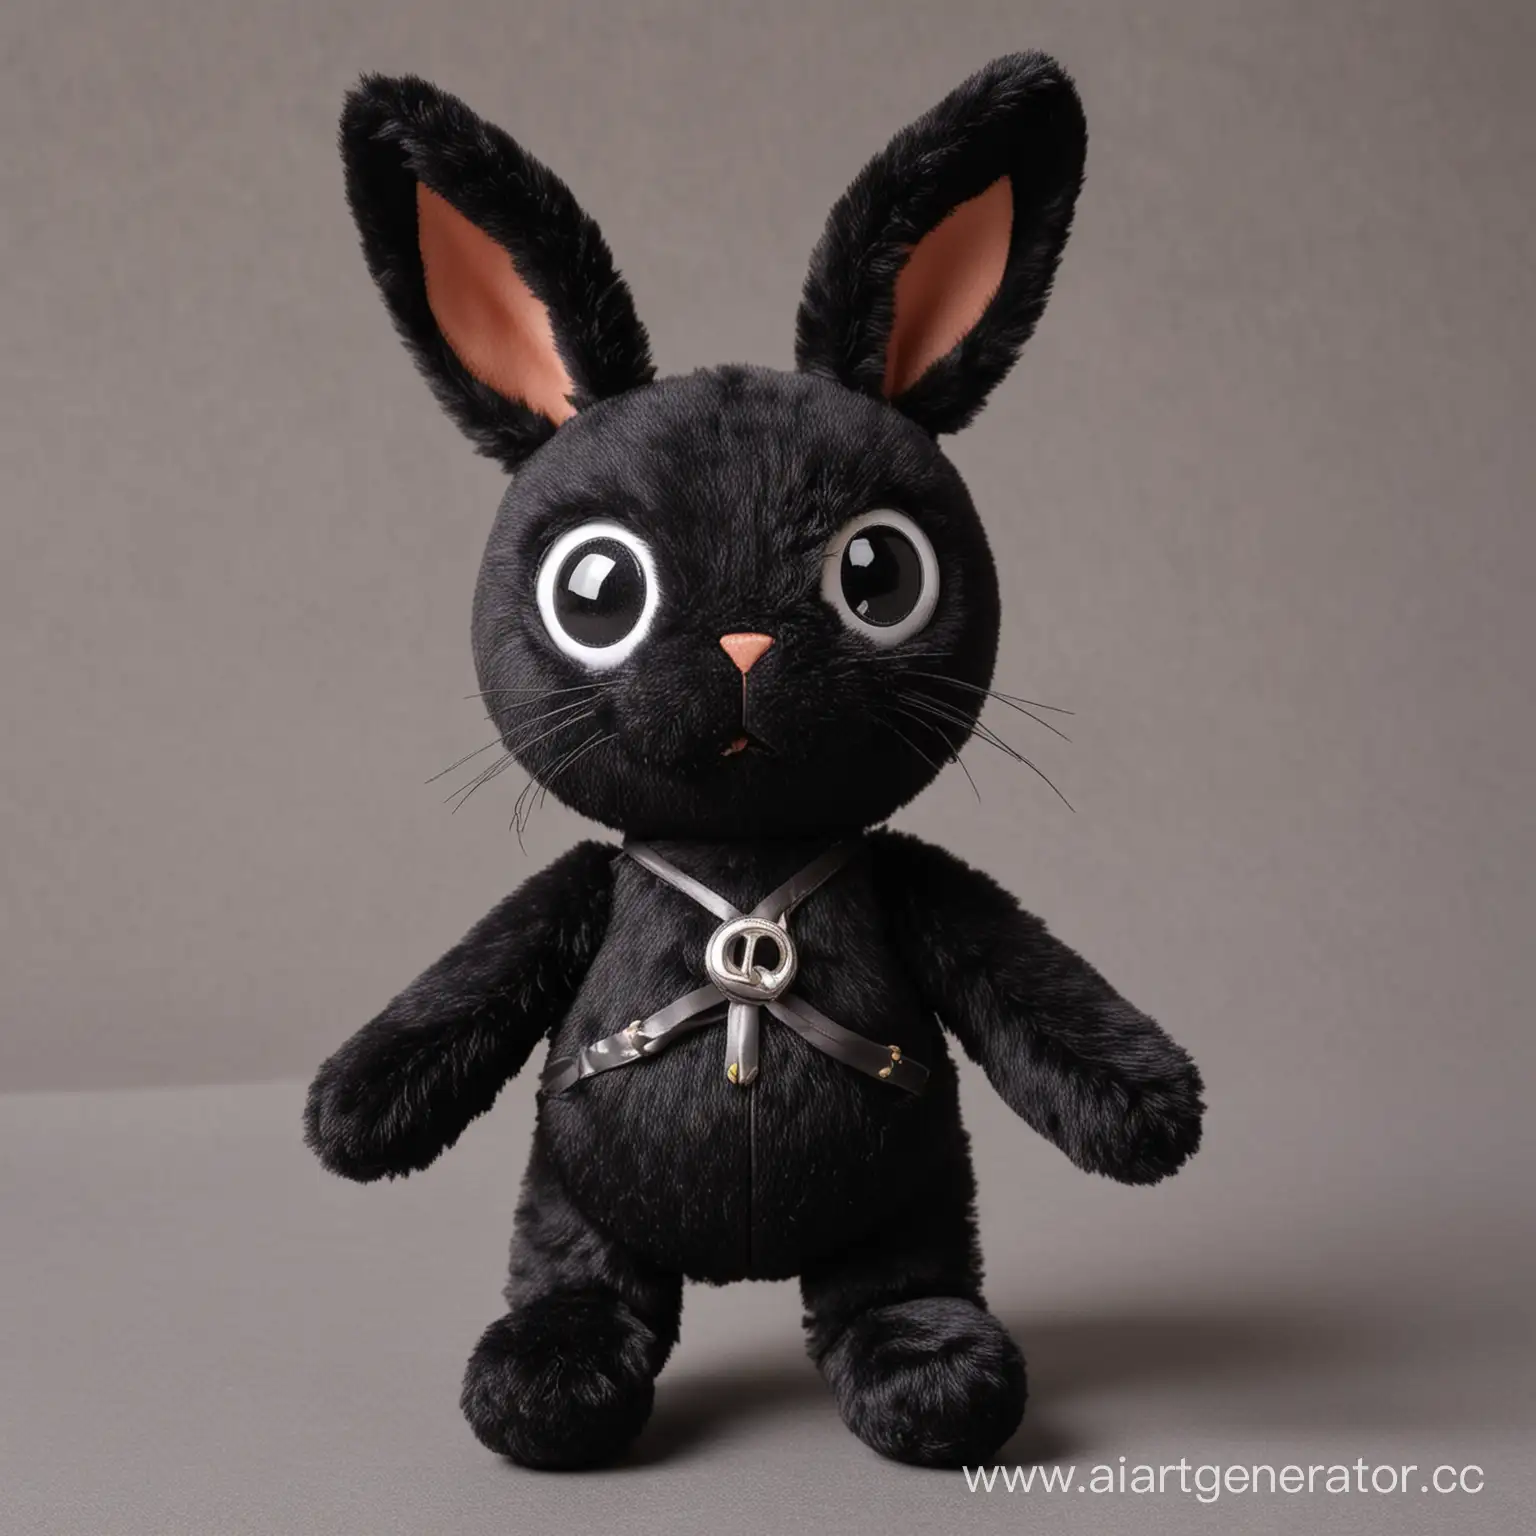 Cute-Black-Rabbit-Toy-with-Crossed-Eyes-Playful-Pet-for-Fun-and-Laughter